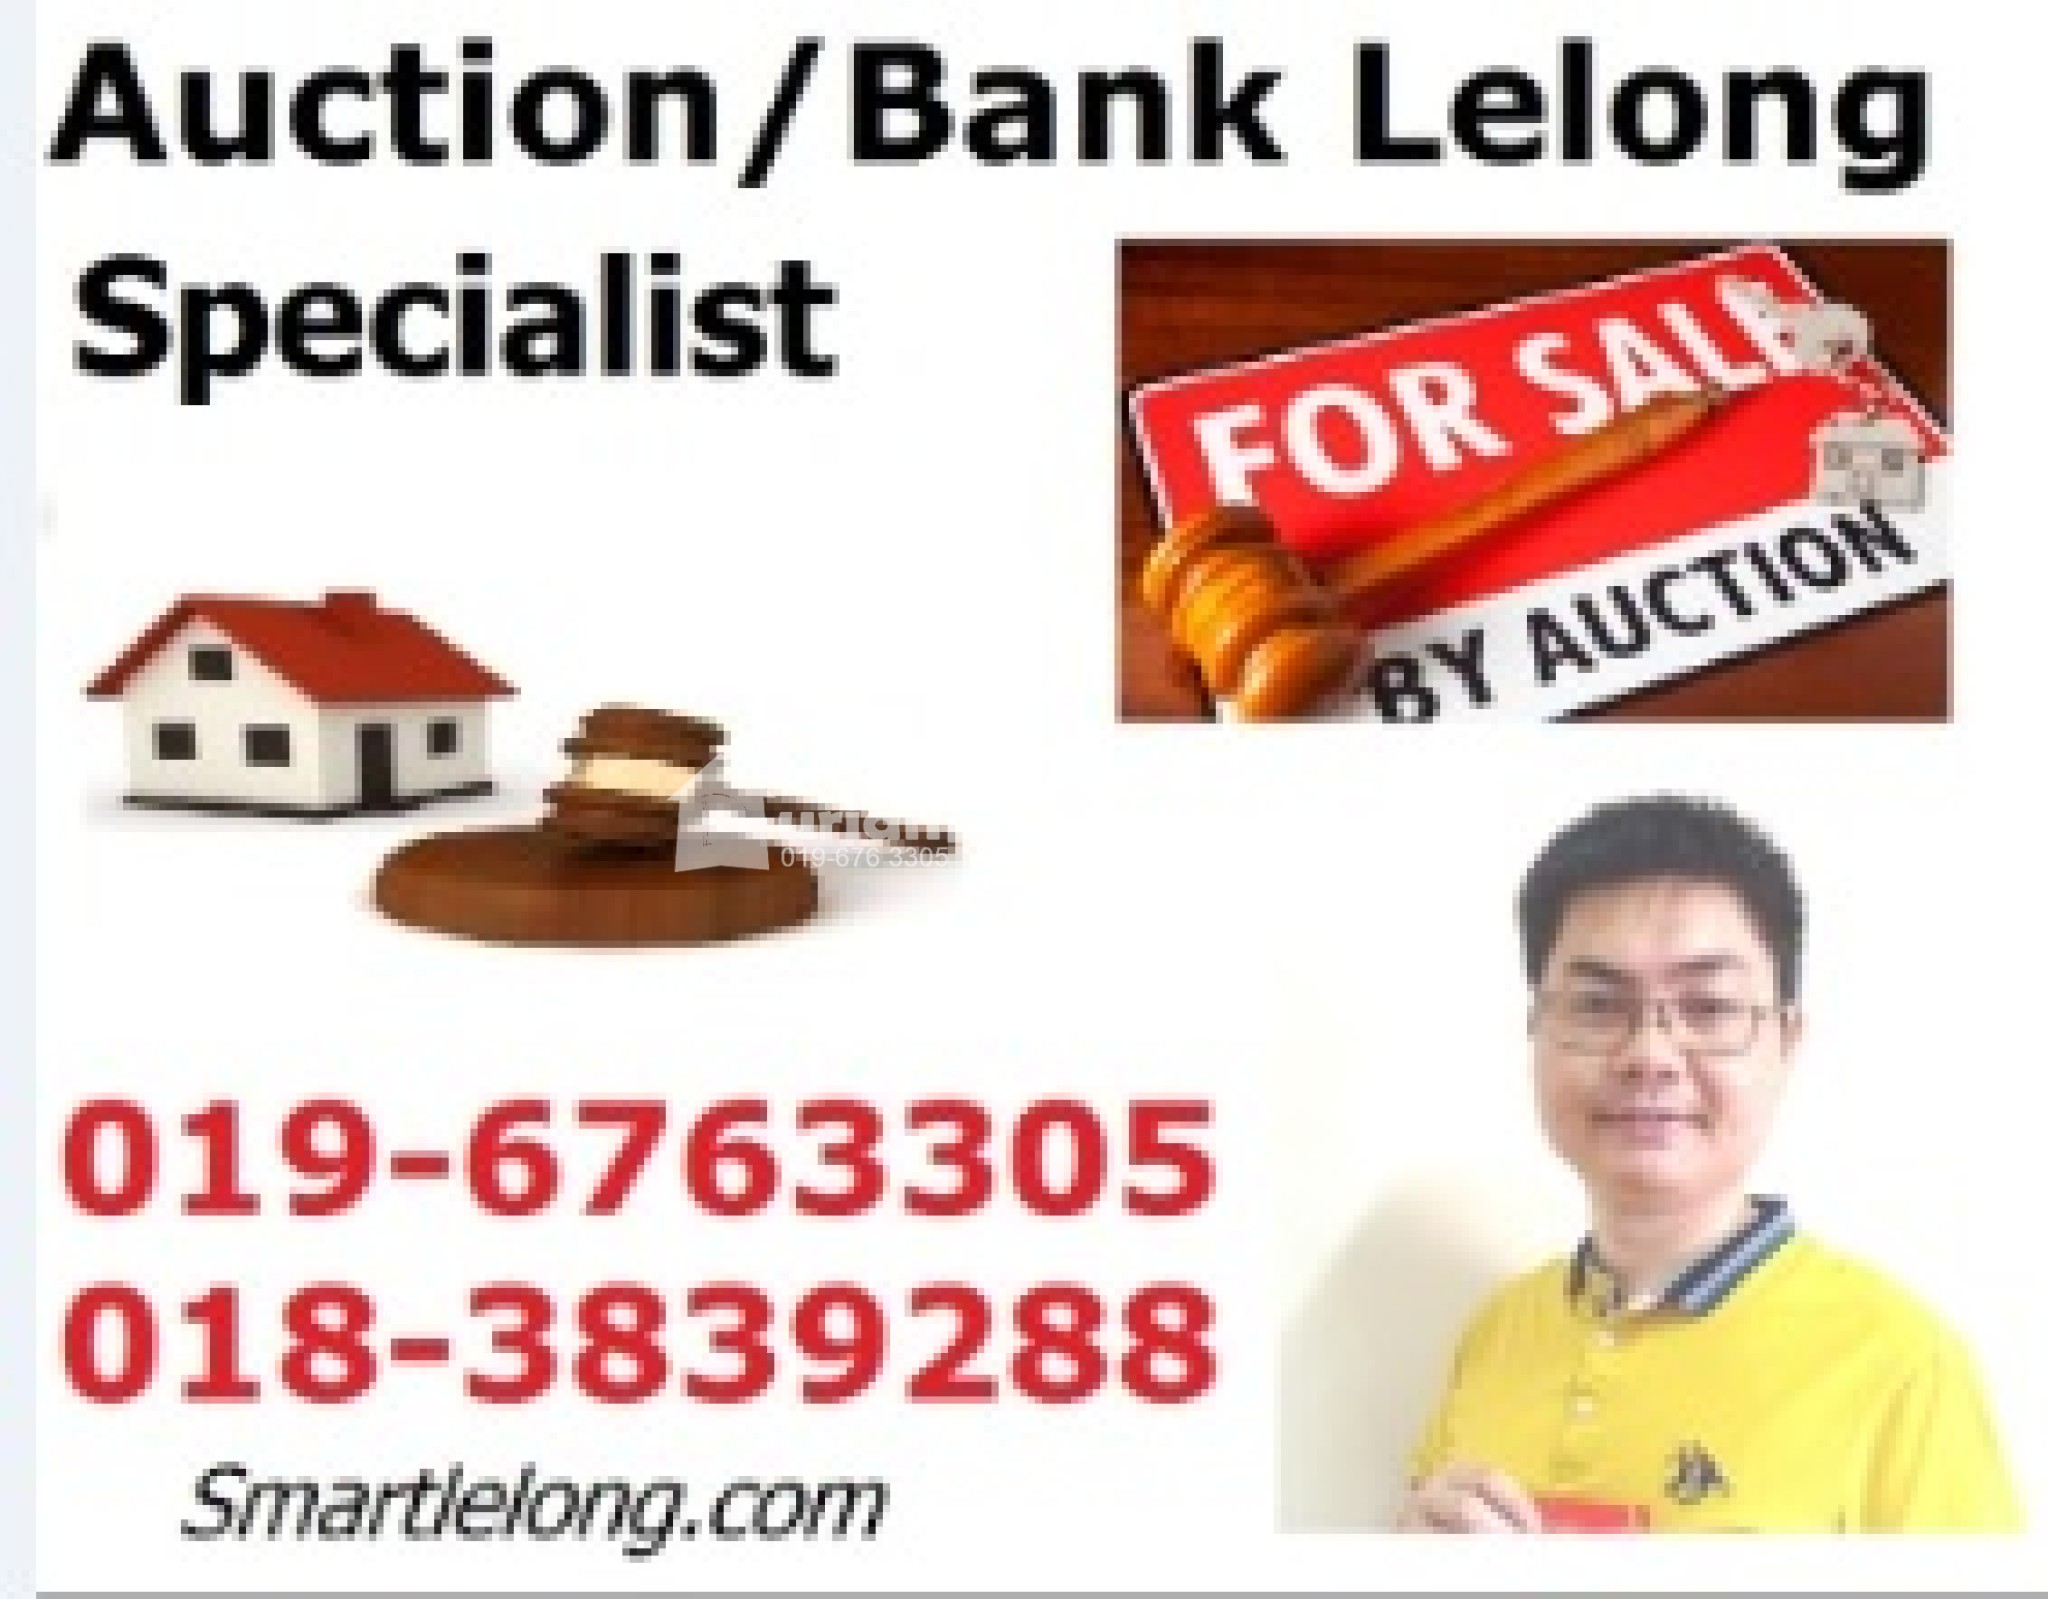 Condo For Auction at Verticas Residensi